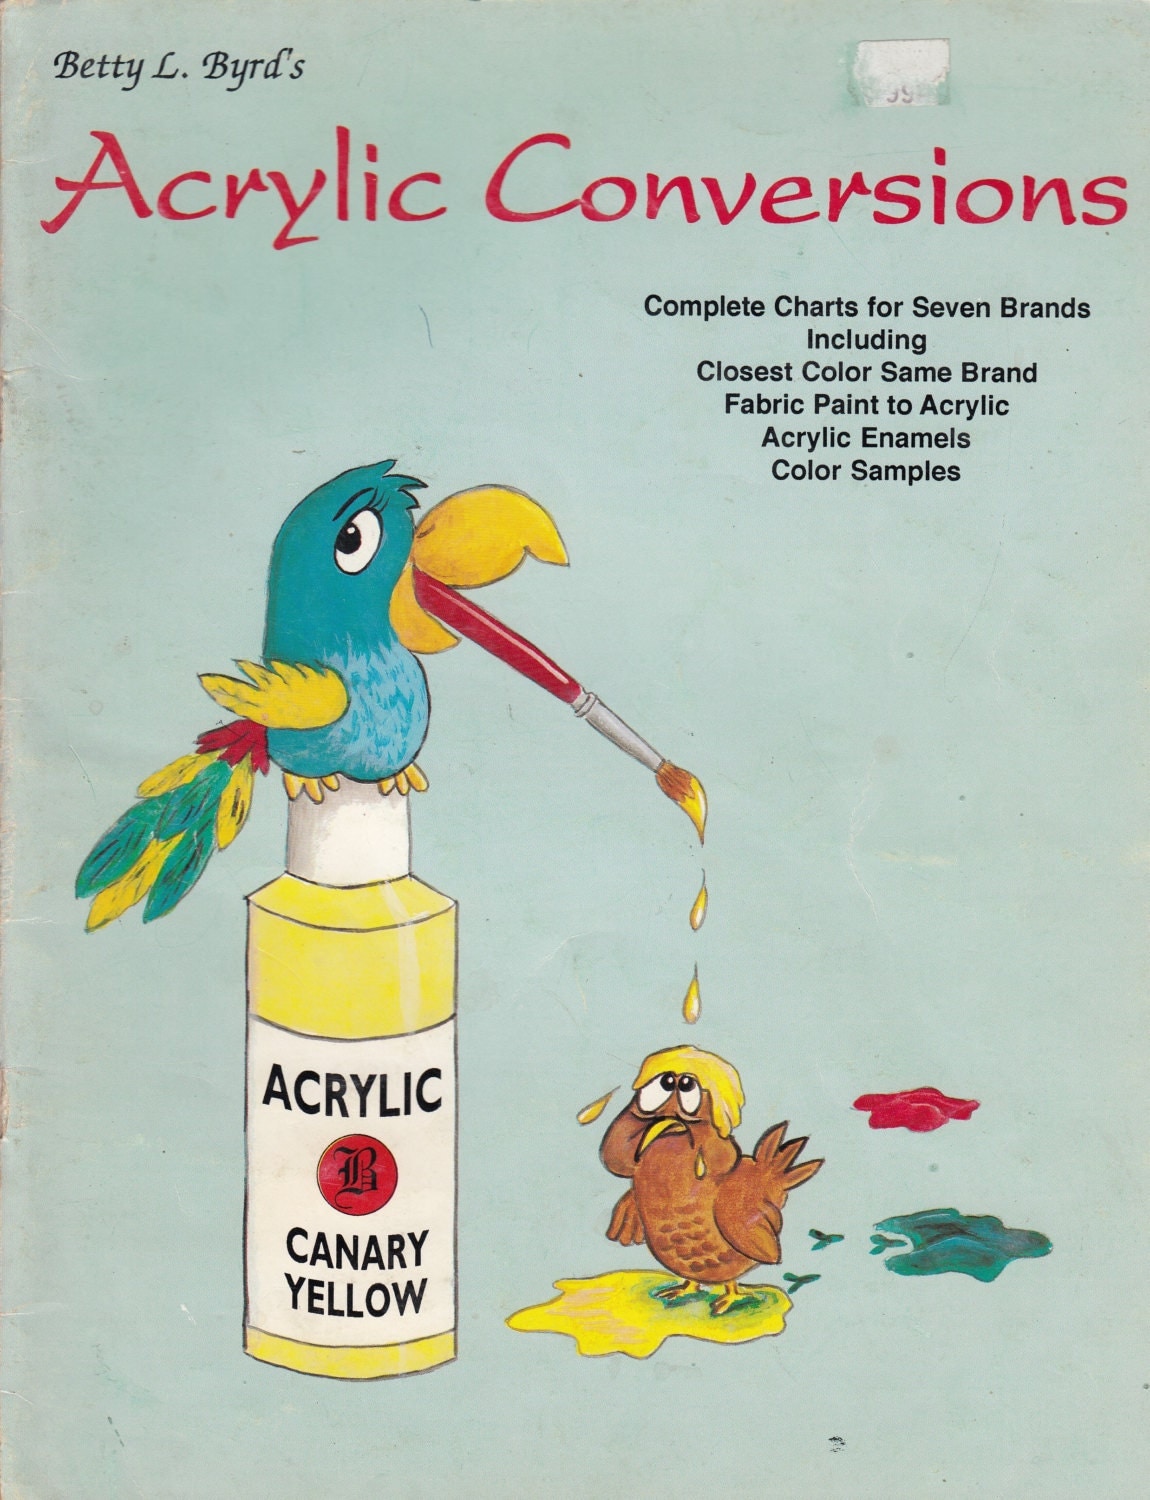 acrylic-conversions-complete-charts-for-acrylic-enamel-color